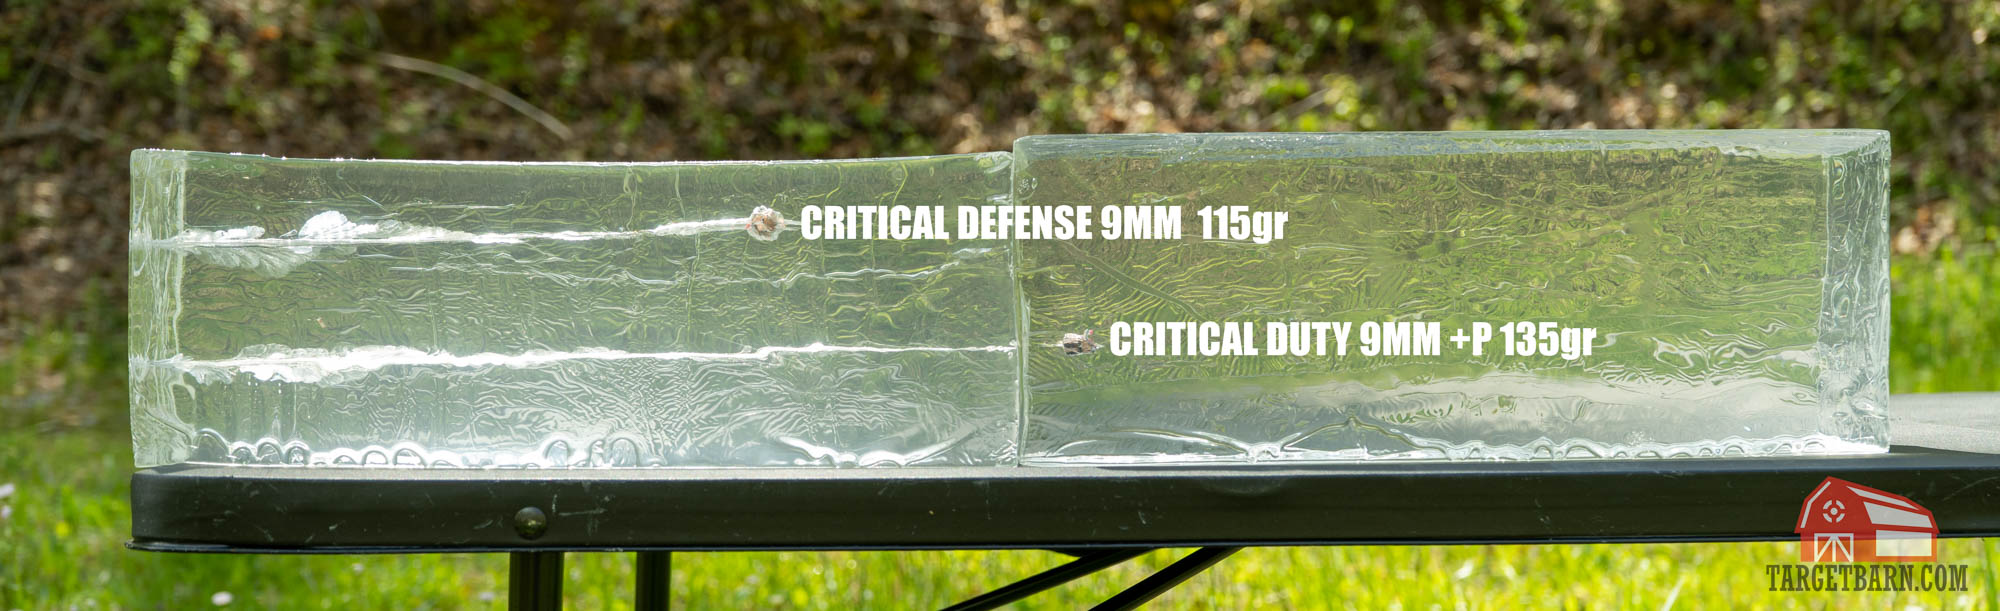 showing 9mm critical defense and 9mm critical duty in ballistic gel, with the critical duty having more penetration 